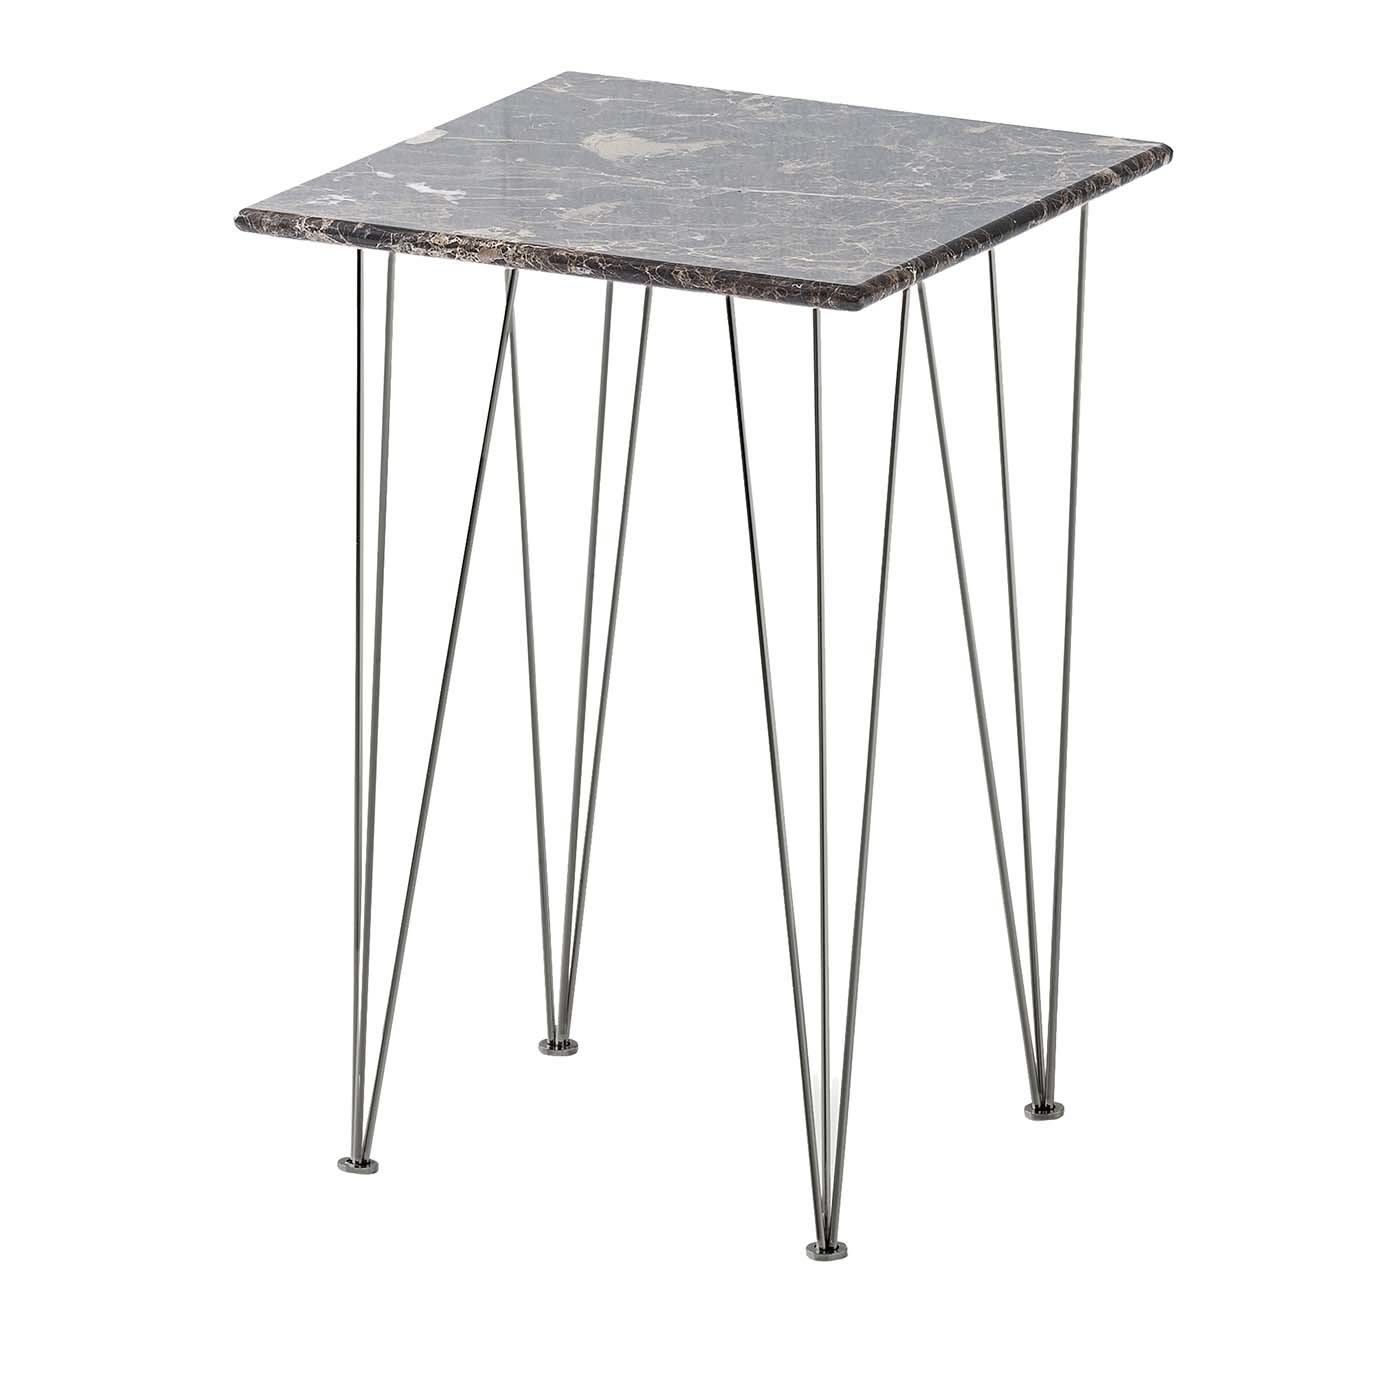 Flamingo Square Side Table with Black Legs - Gam Home